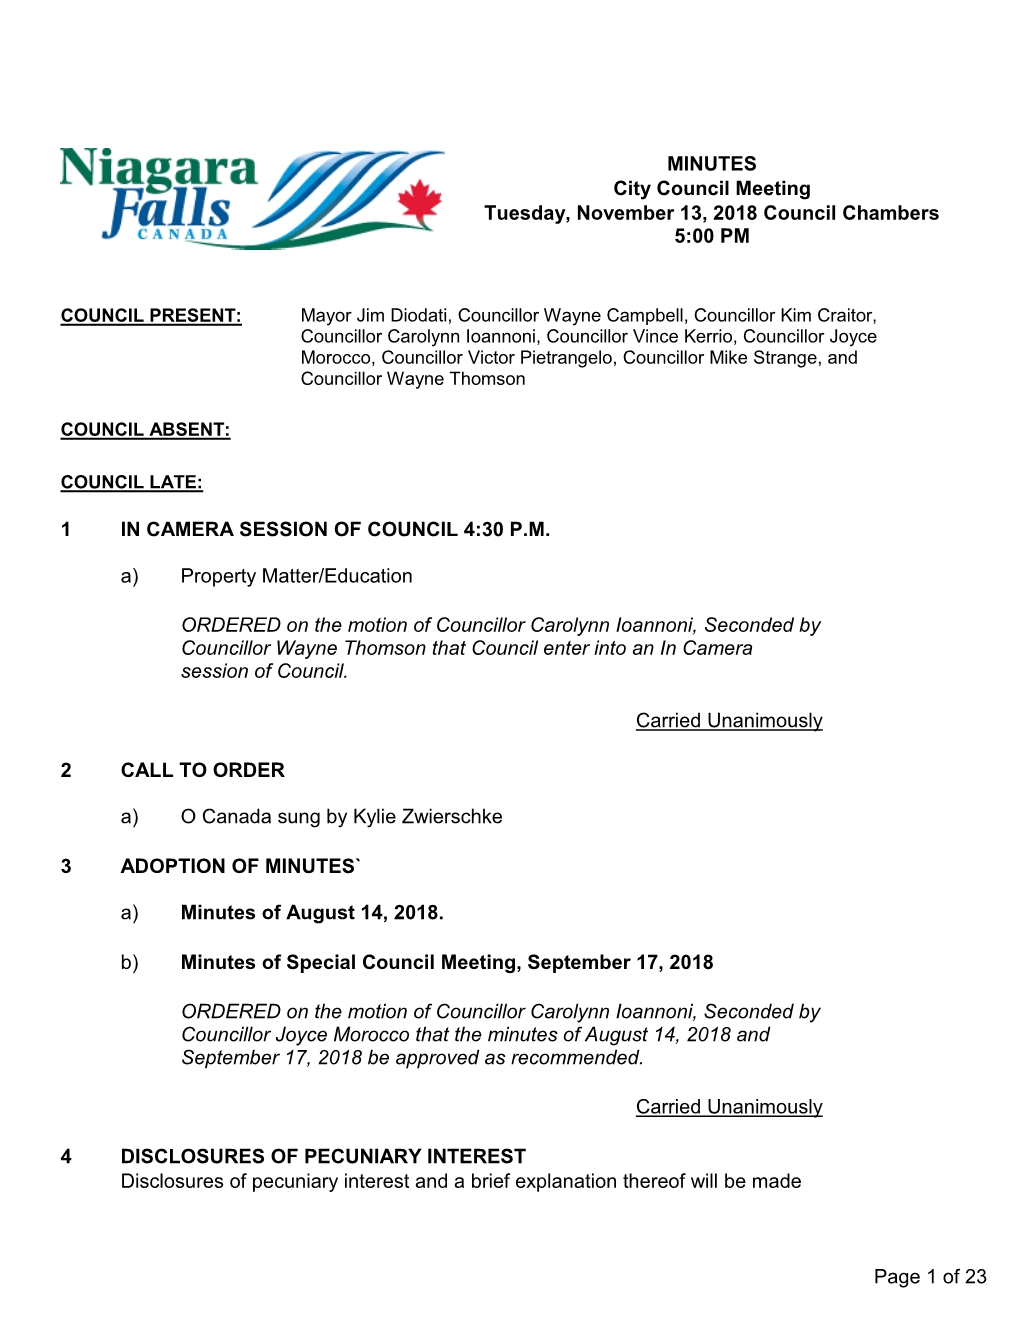 City Council Meeting Tuesday, November 13, 2018 Council Chambers 5:00 PM